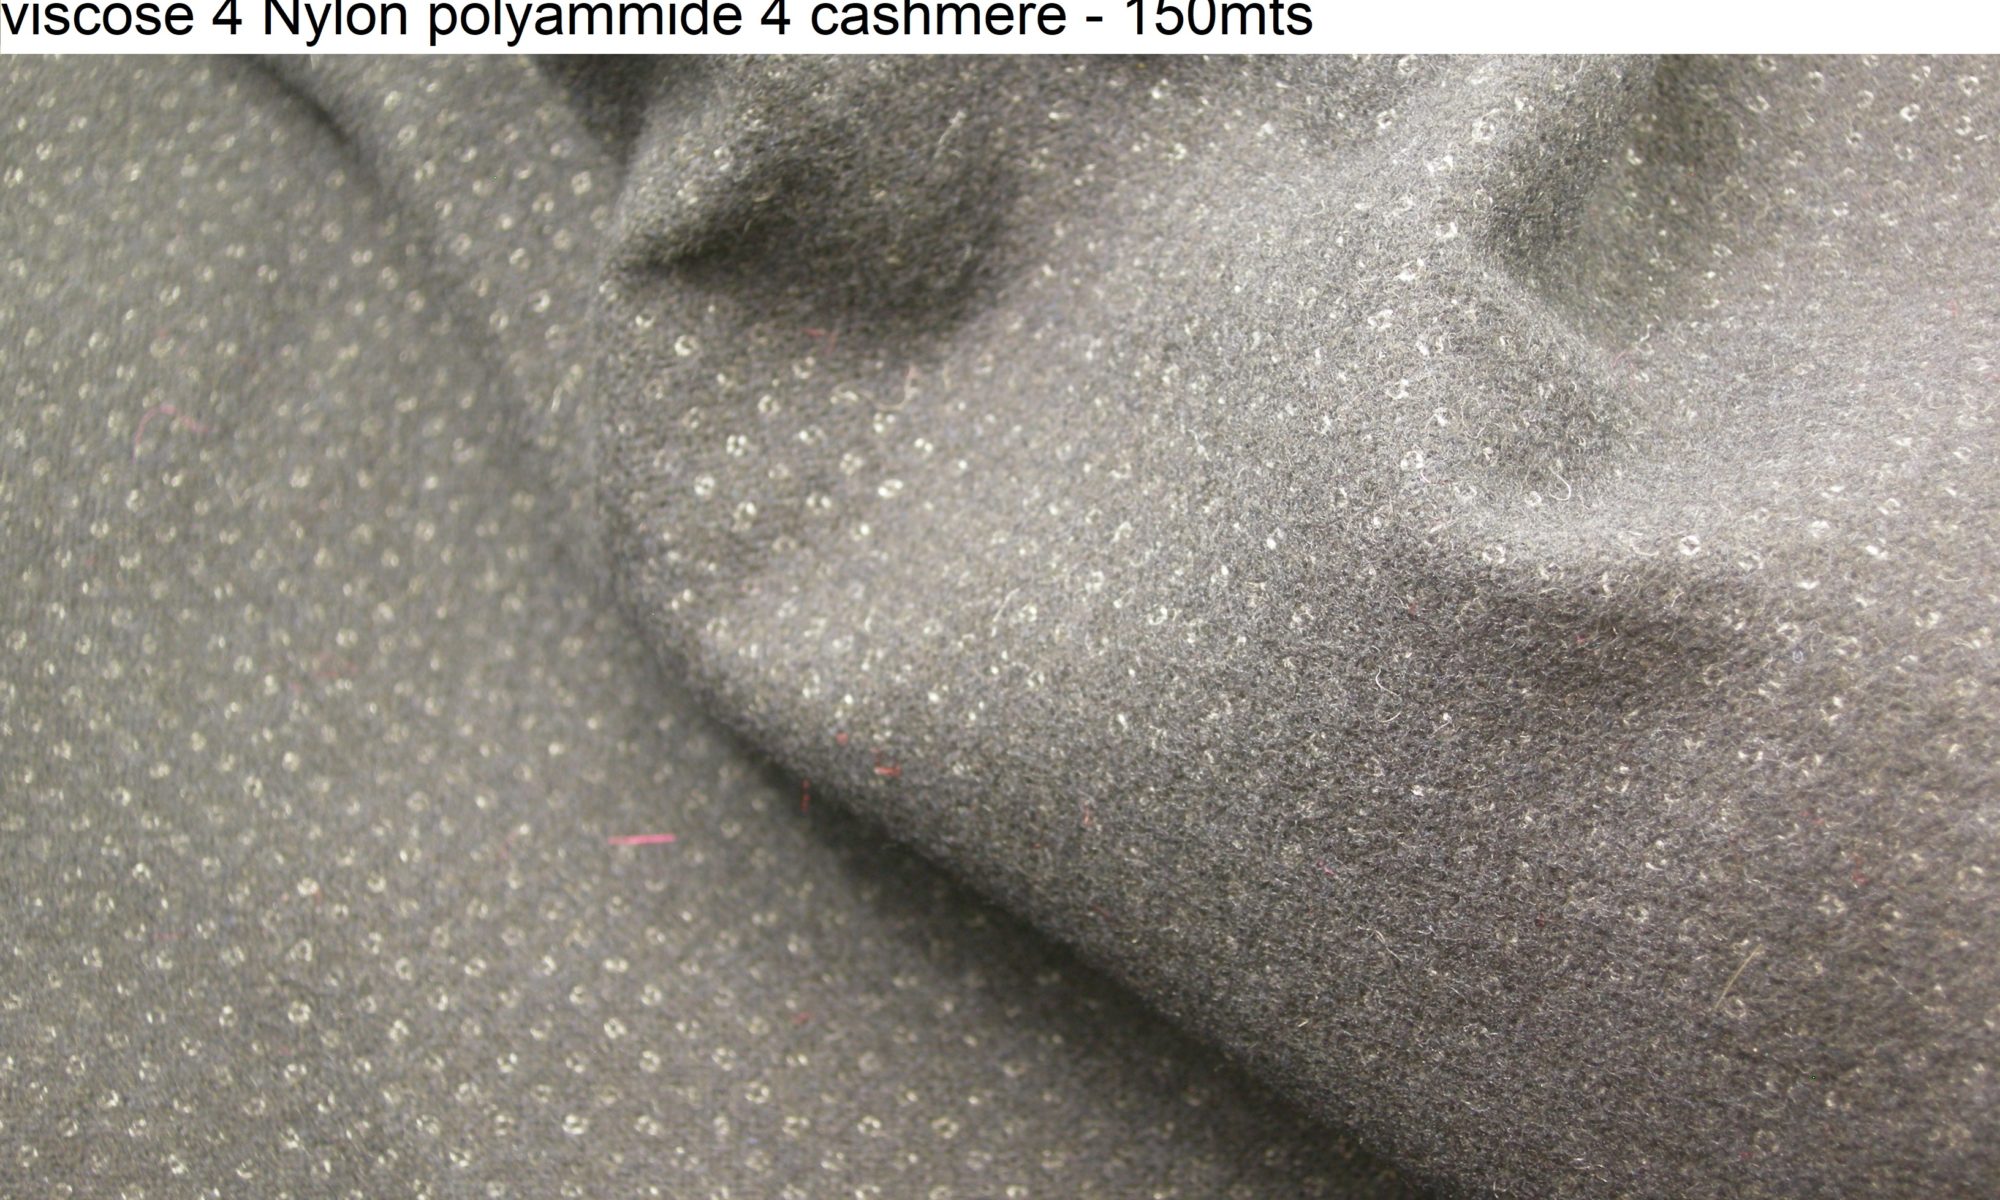 ART 7211 birdseye cashmere blend brushed coat glamour fabric WIDTH cm150 WEIGHT gr620 COMPOSITION 48 Wool 34 polyester 10 rayon viscose 4 Nylon polyammide 4 cashmere - 150mts